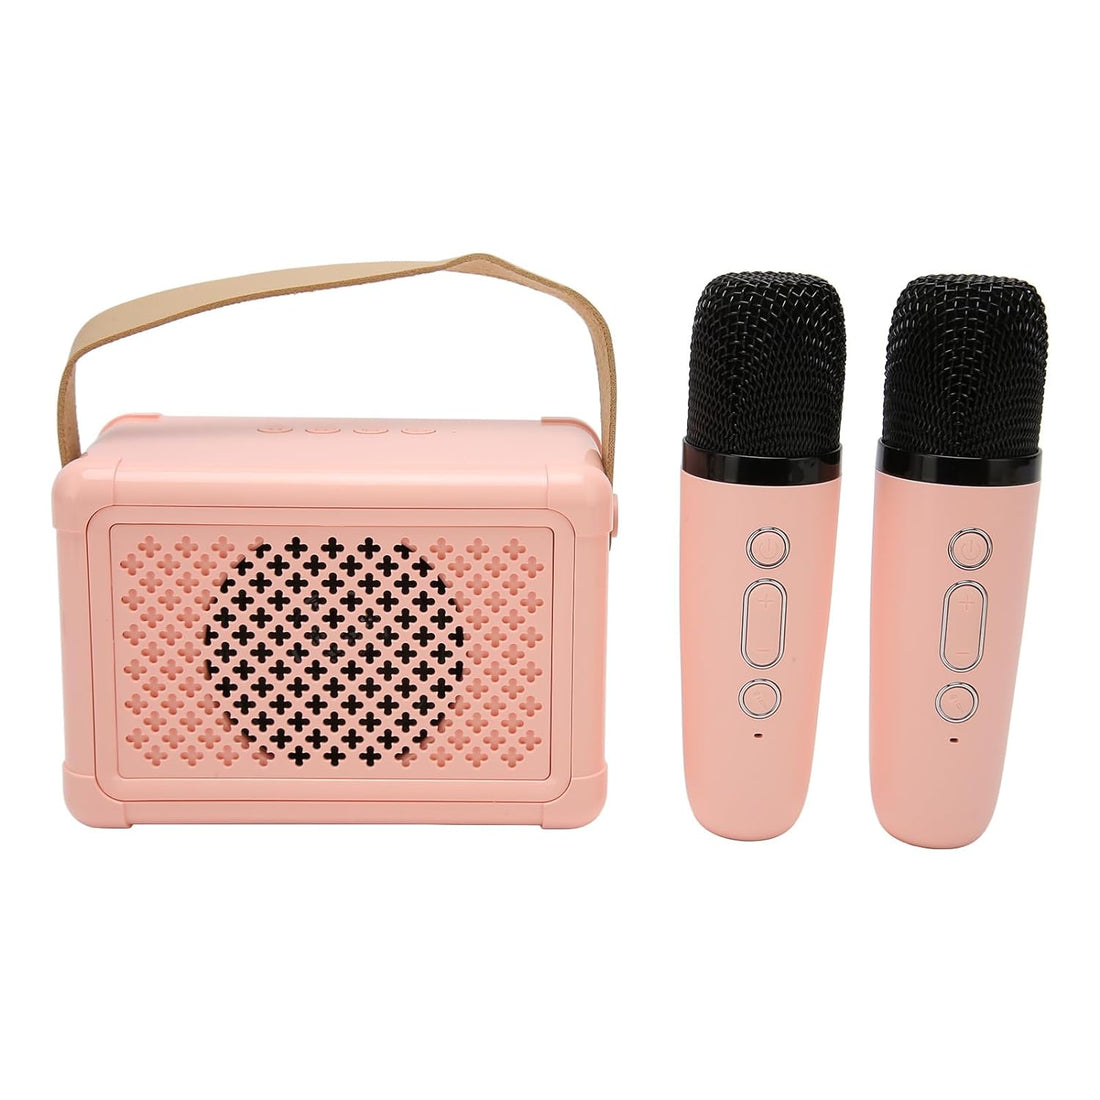 Karaoke Machine for Kids, Portable Wireless Bluetooth Karaoke Speakers with 2 Wireless Microphones, 6 Sound Effects, Bluetooth Compatible, (Pink)